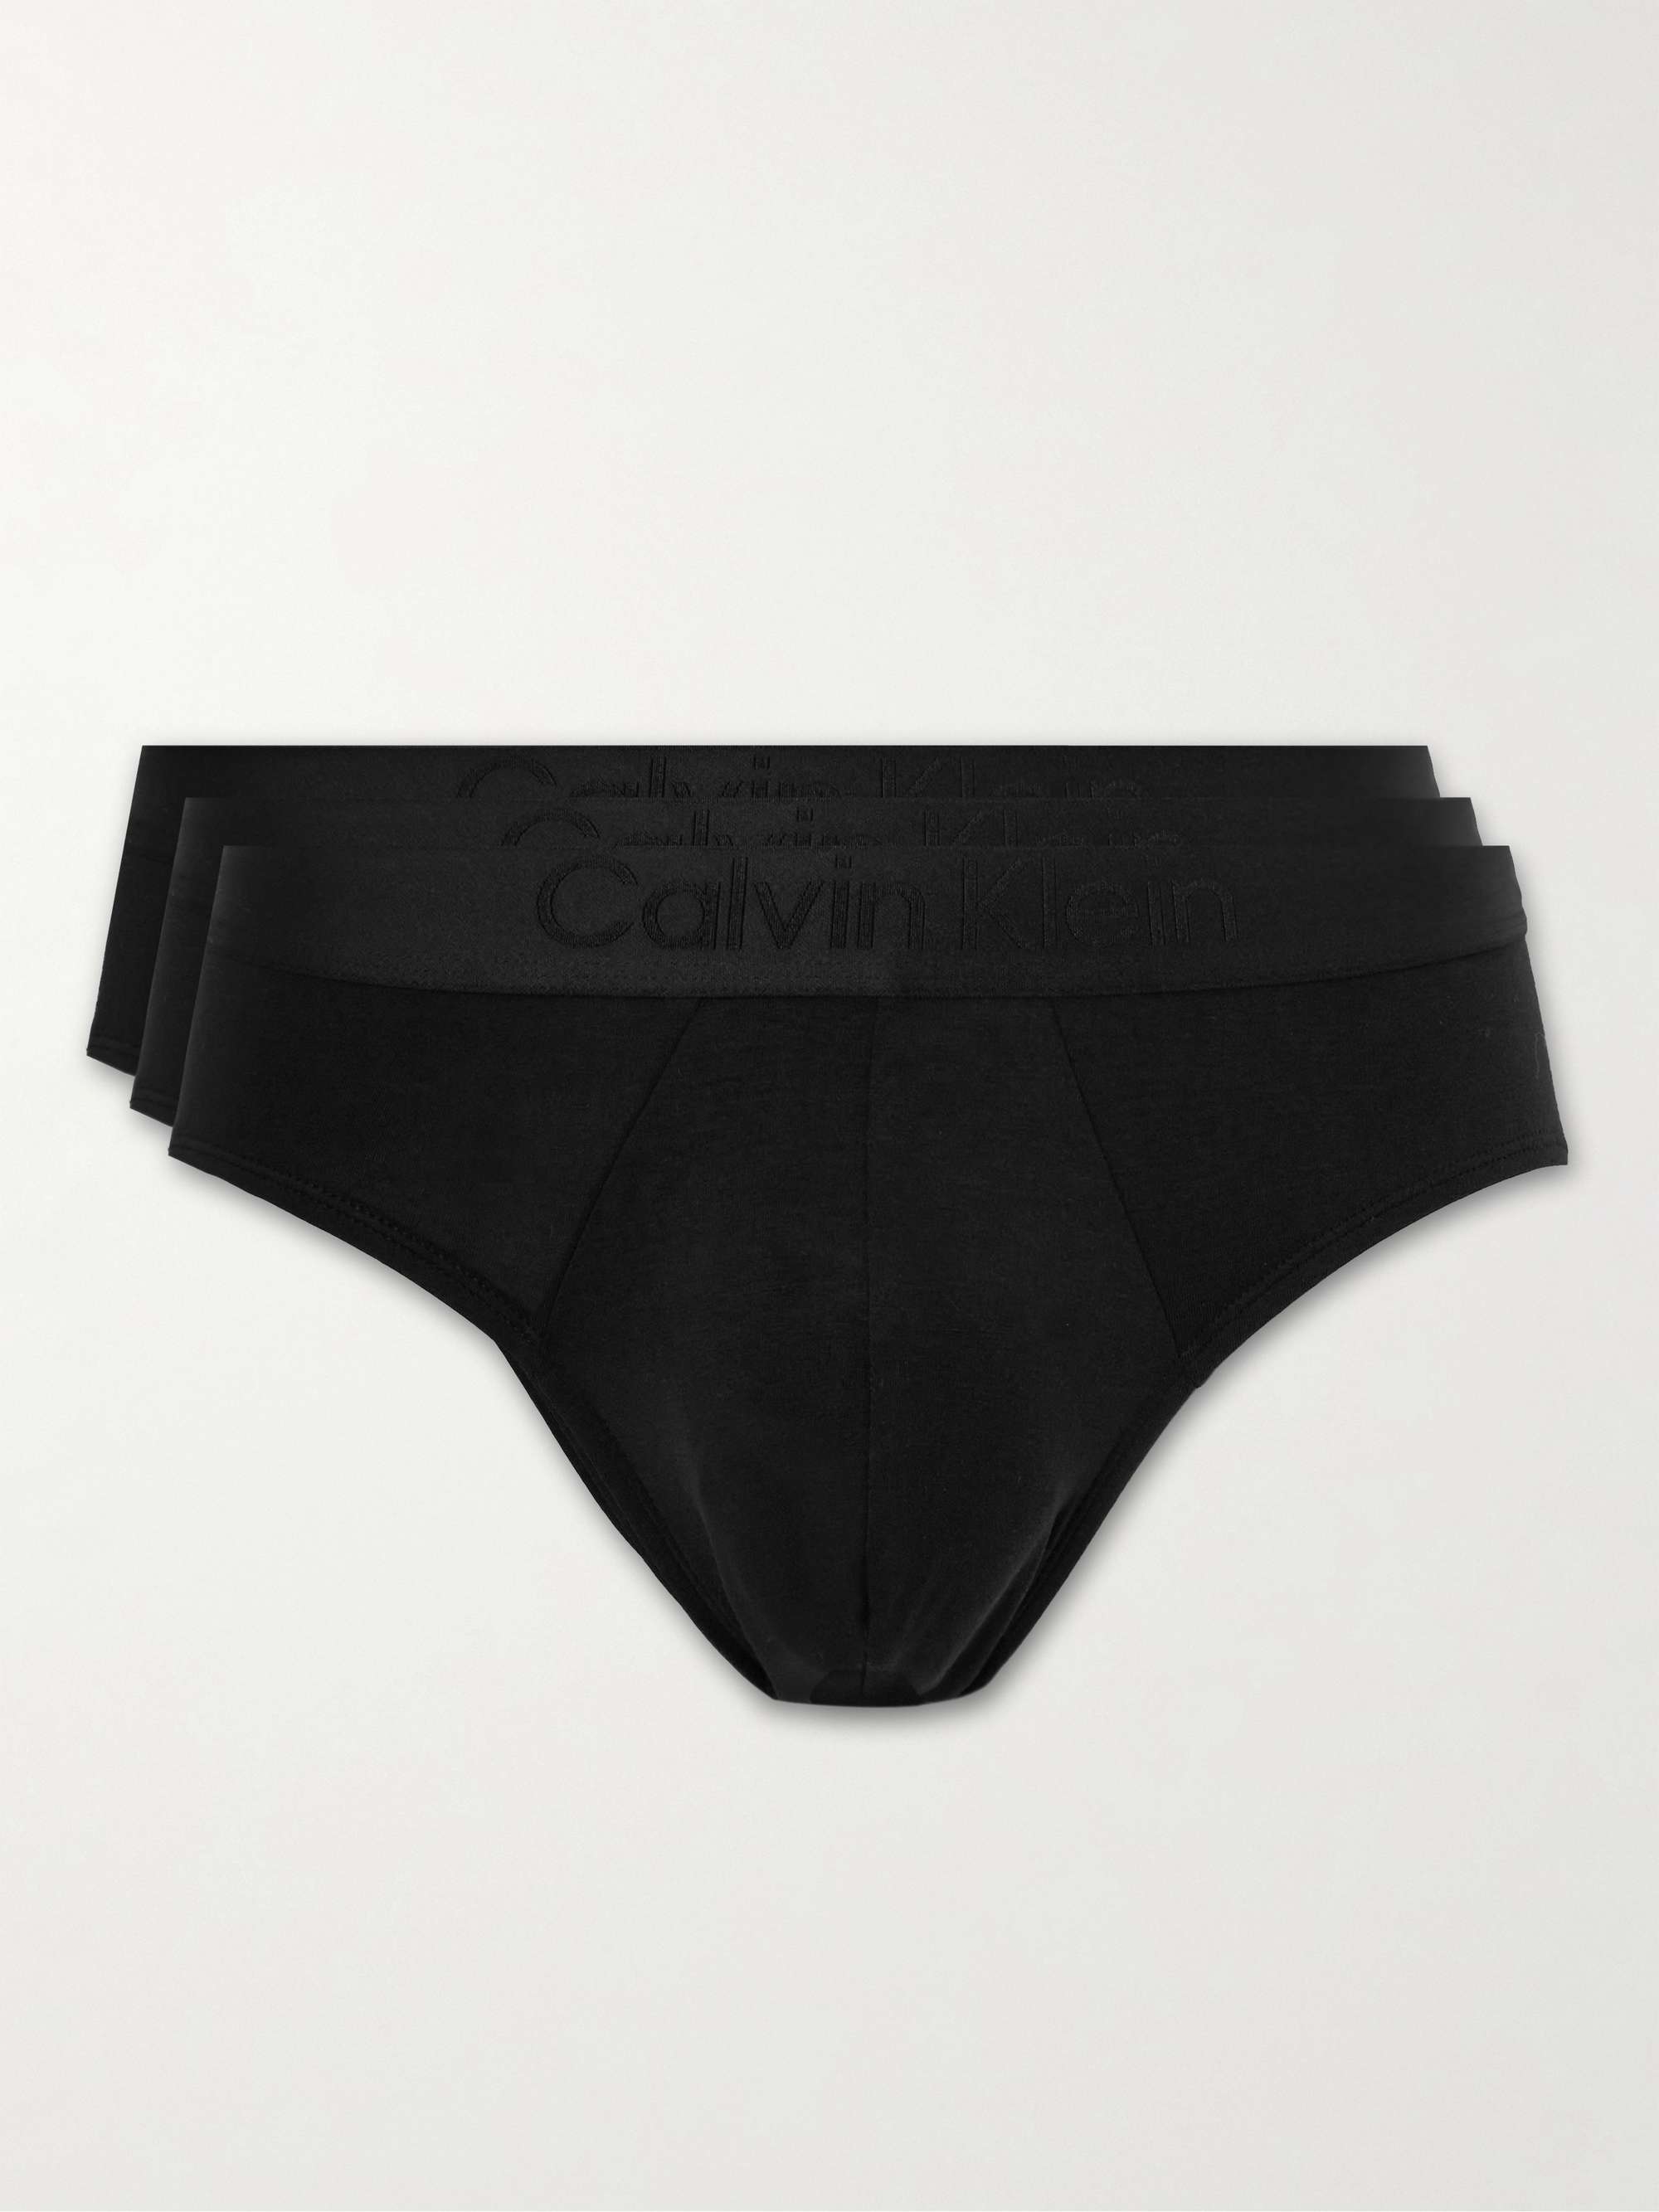 Calvin Klein, Accessories, New Calvin Klein 7 Pack Days Of The Week Thongs  Size Small